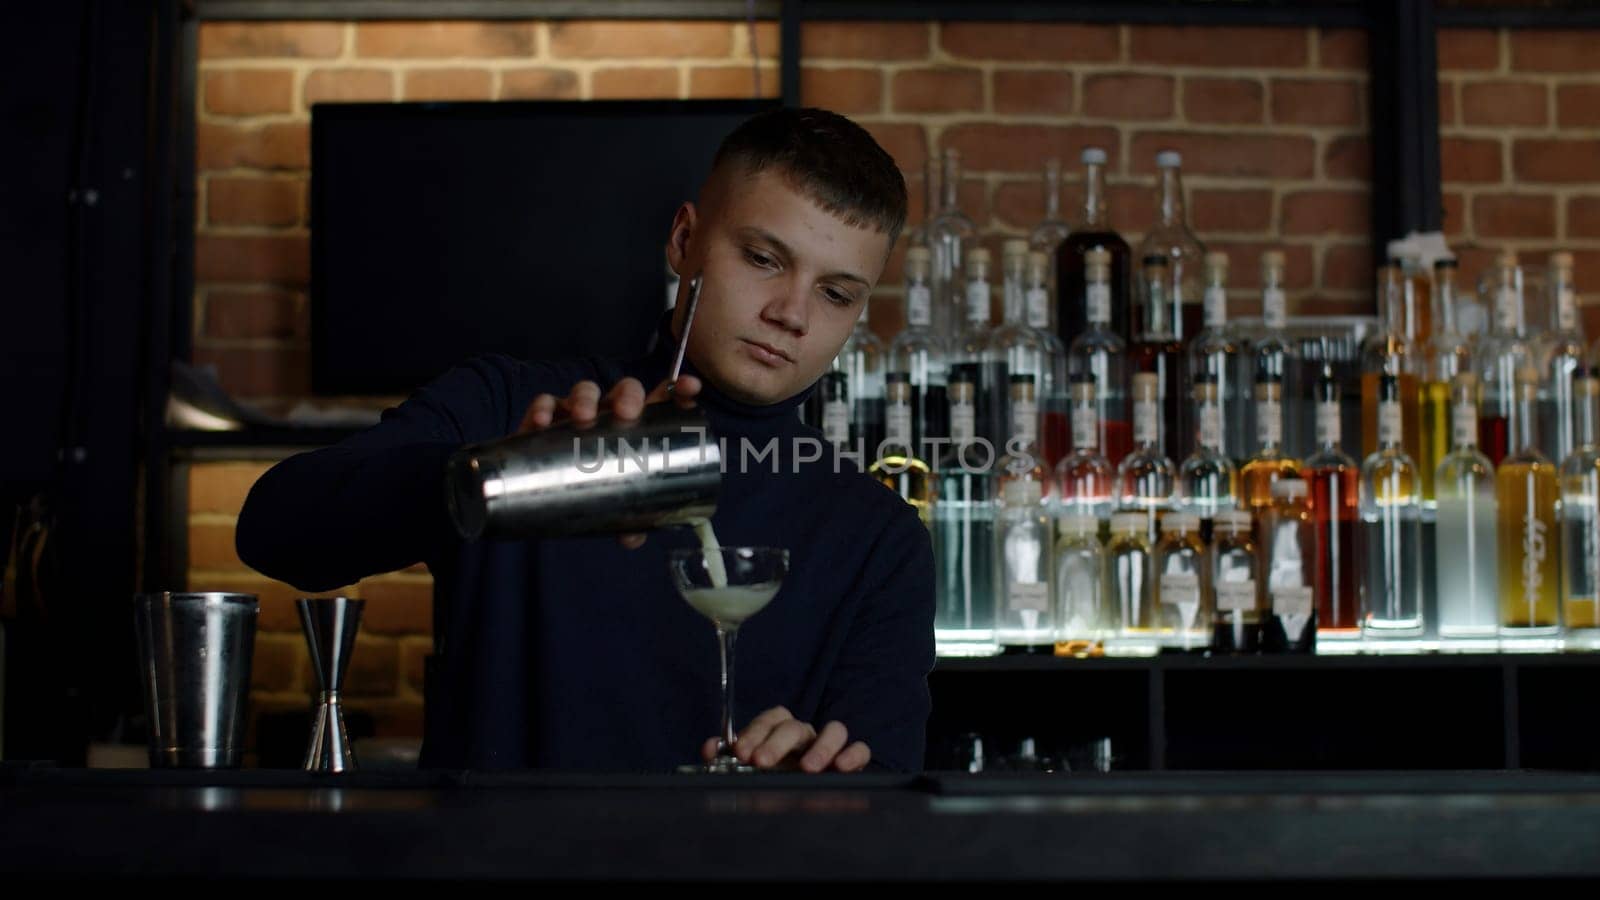 The barman preparing perfect cocktail, standing behind the bar counter. Media. Many bottles of alcohol on the background. by Mediawhalestock